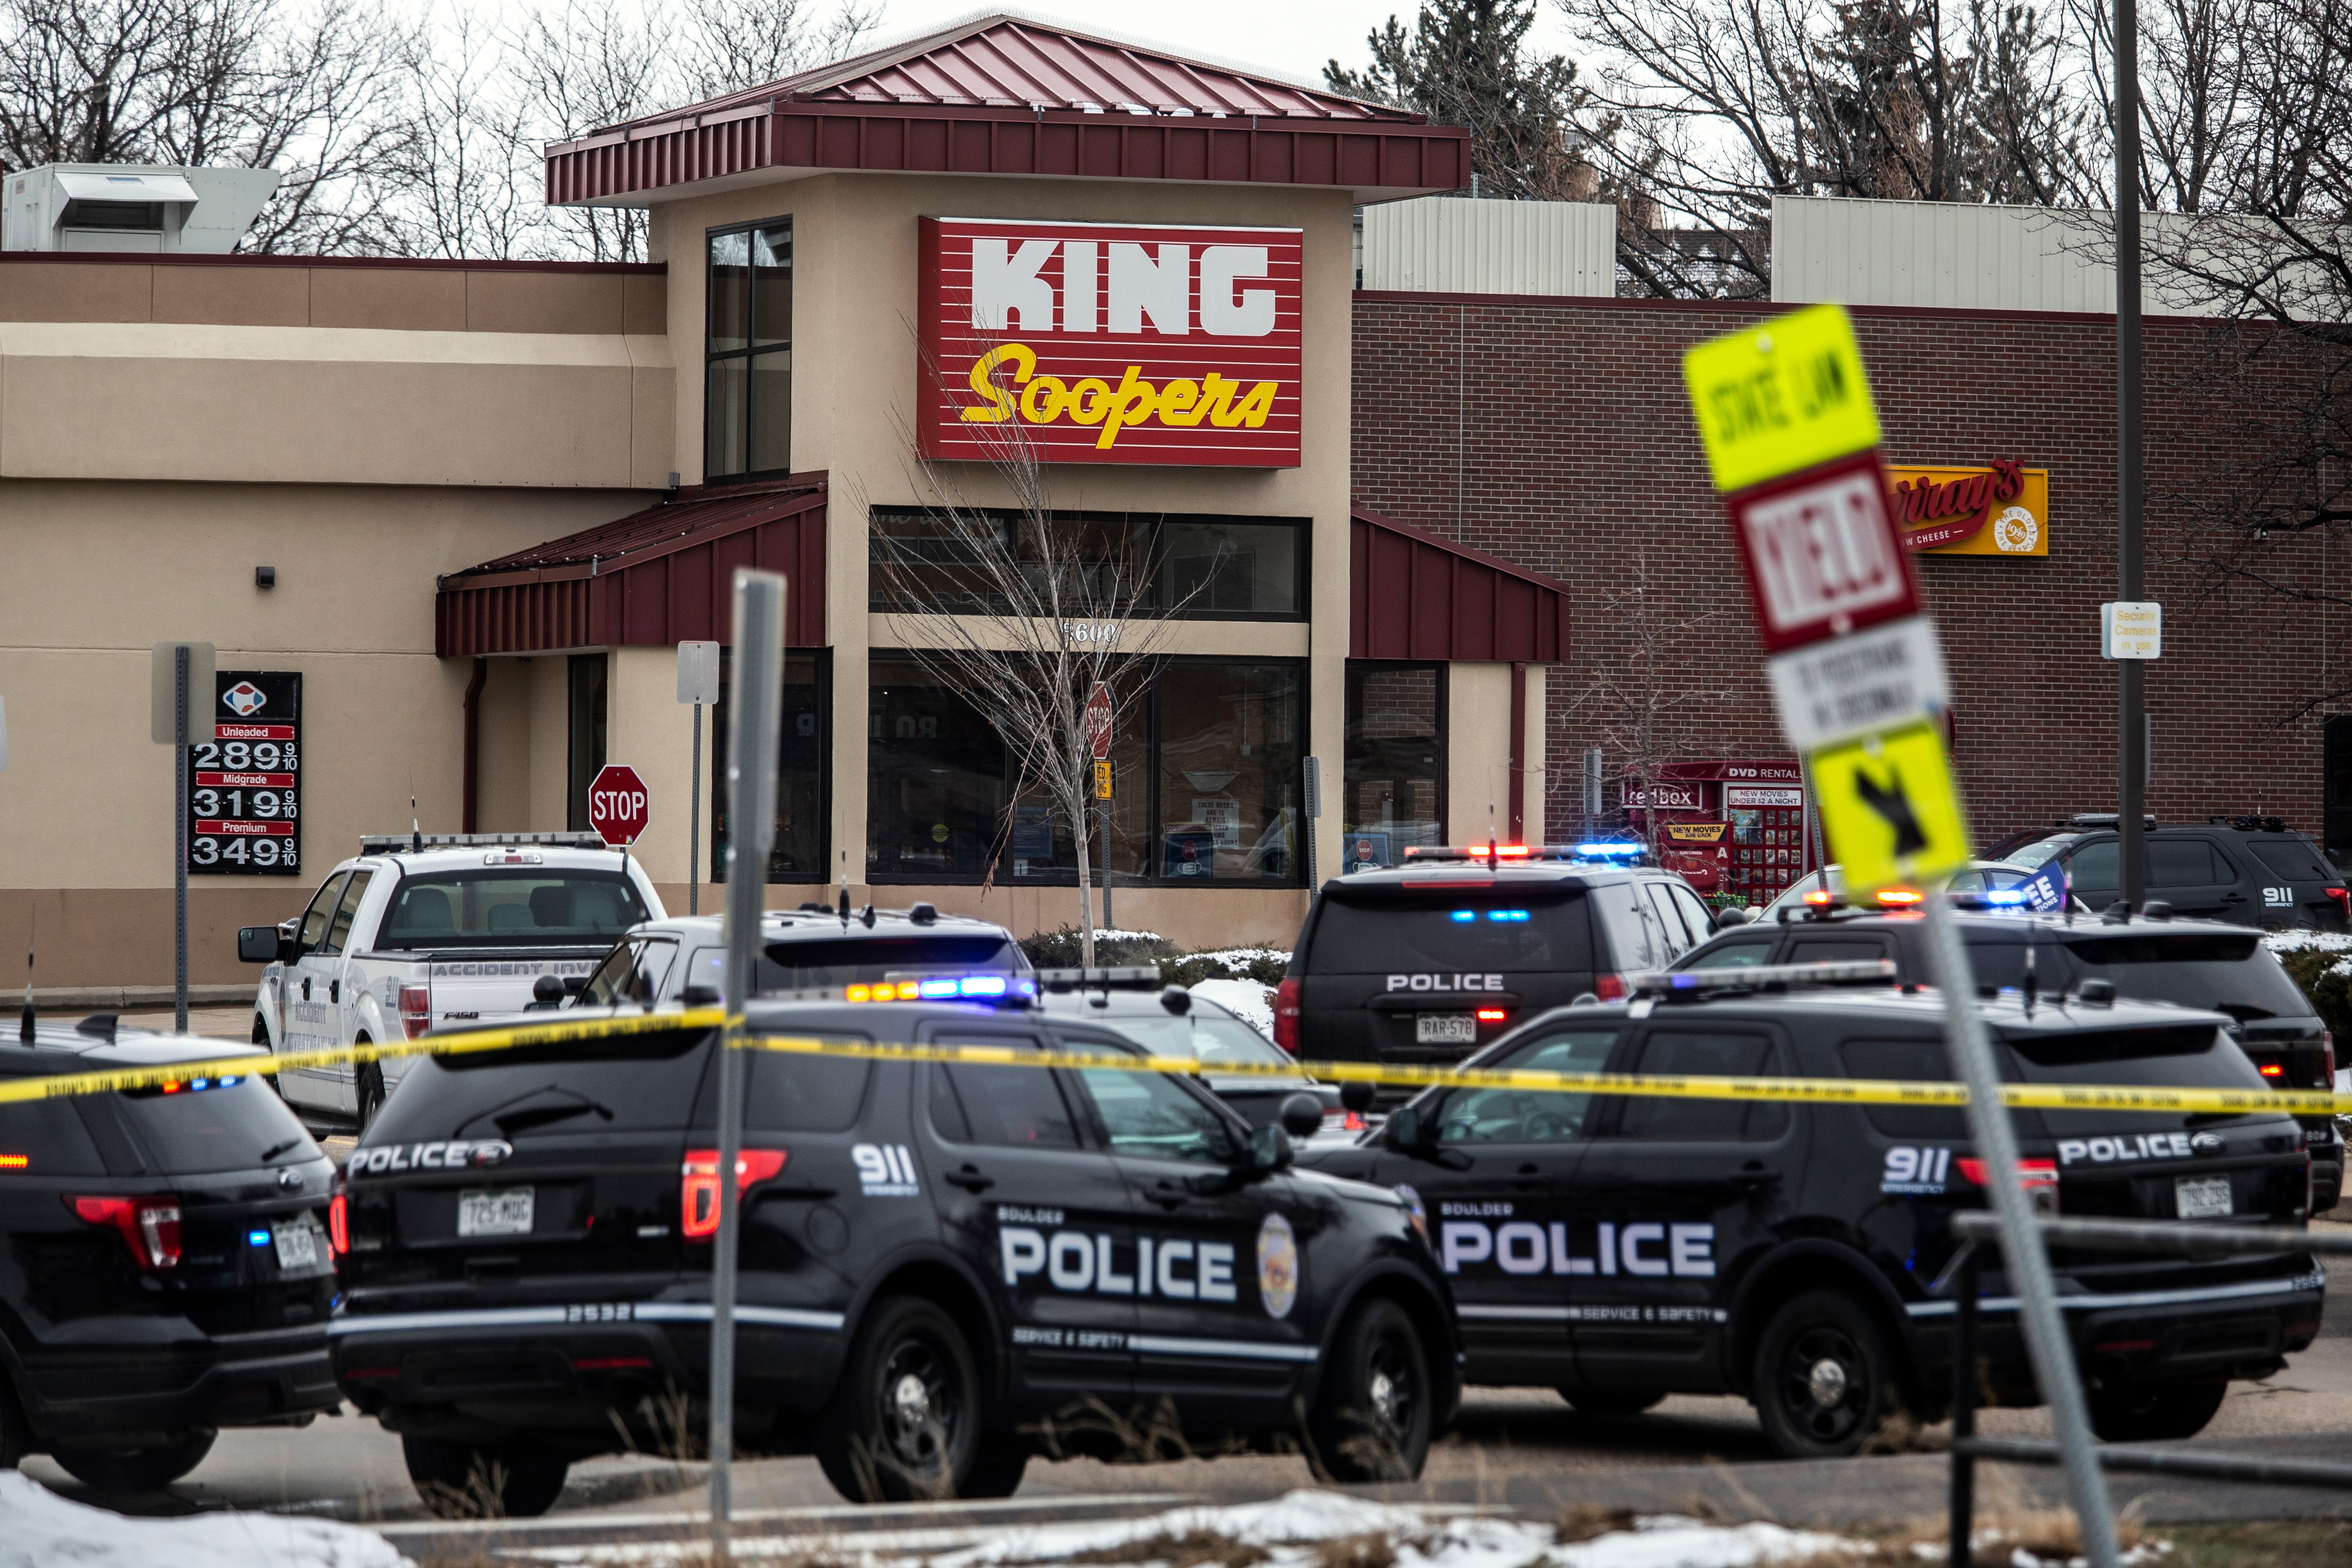 Police respond at a King Sooper's grocery store where a gunman opened fire on March 22, 2021 in Boulder, Colorado